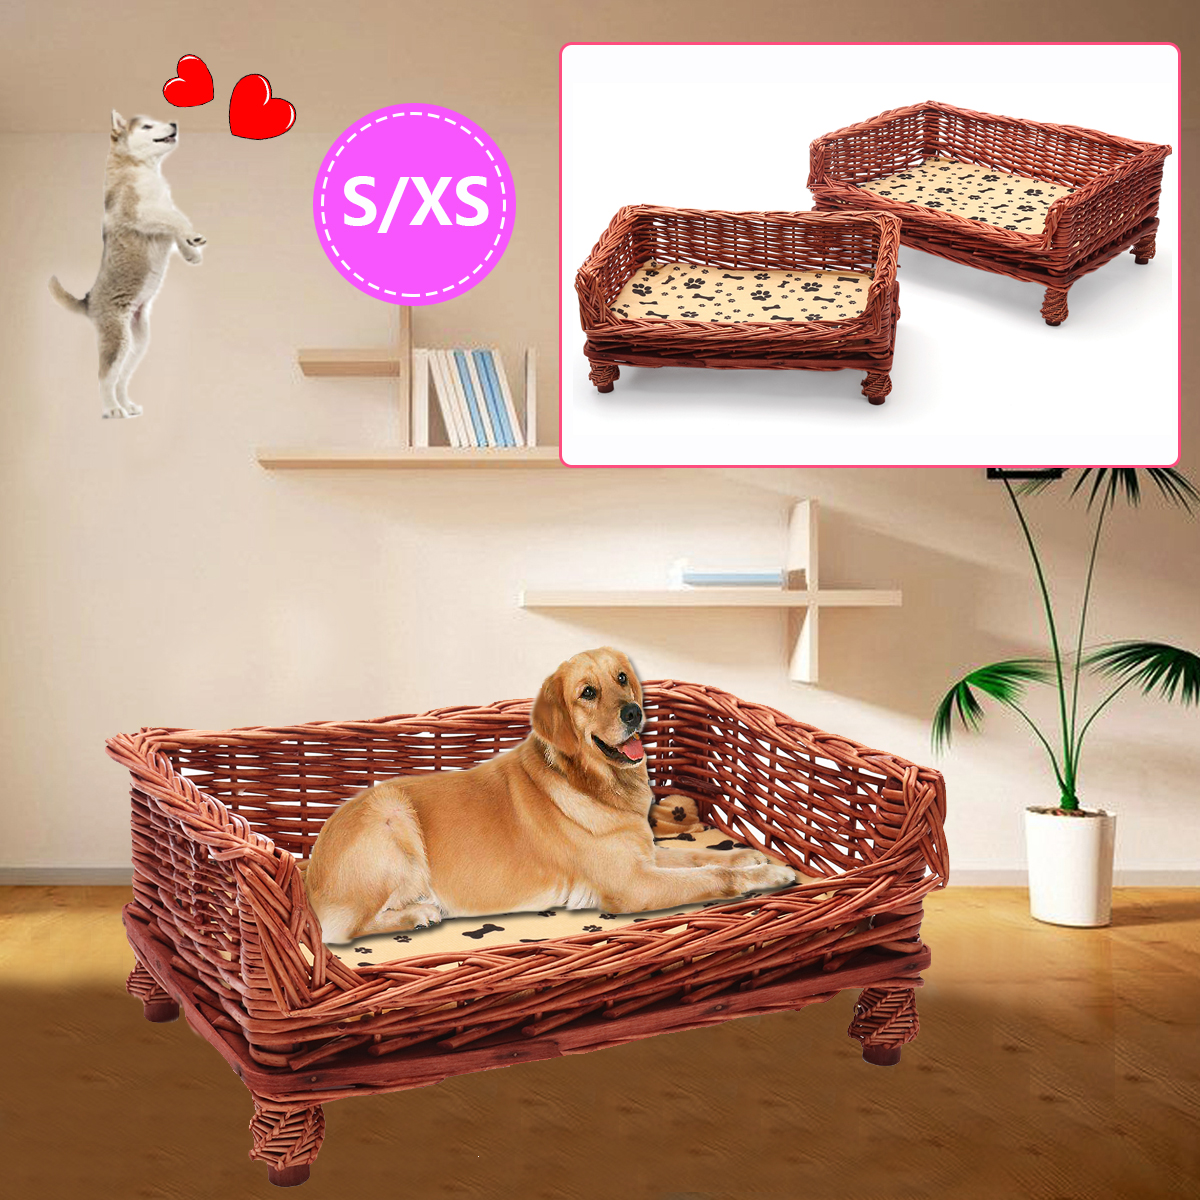 HAND-WOVEN-Wicker-Pet-Bed-Dog-Cat-Basket-Shabby-Chic-Sleeping-Durable-Washable-1640468-1